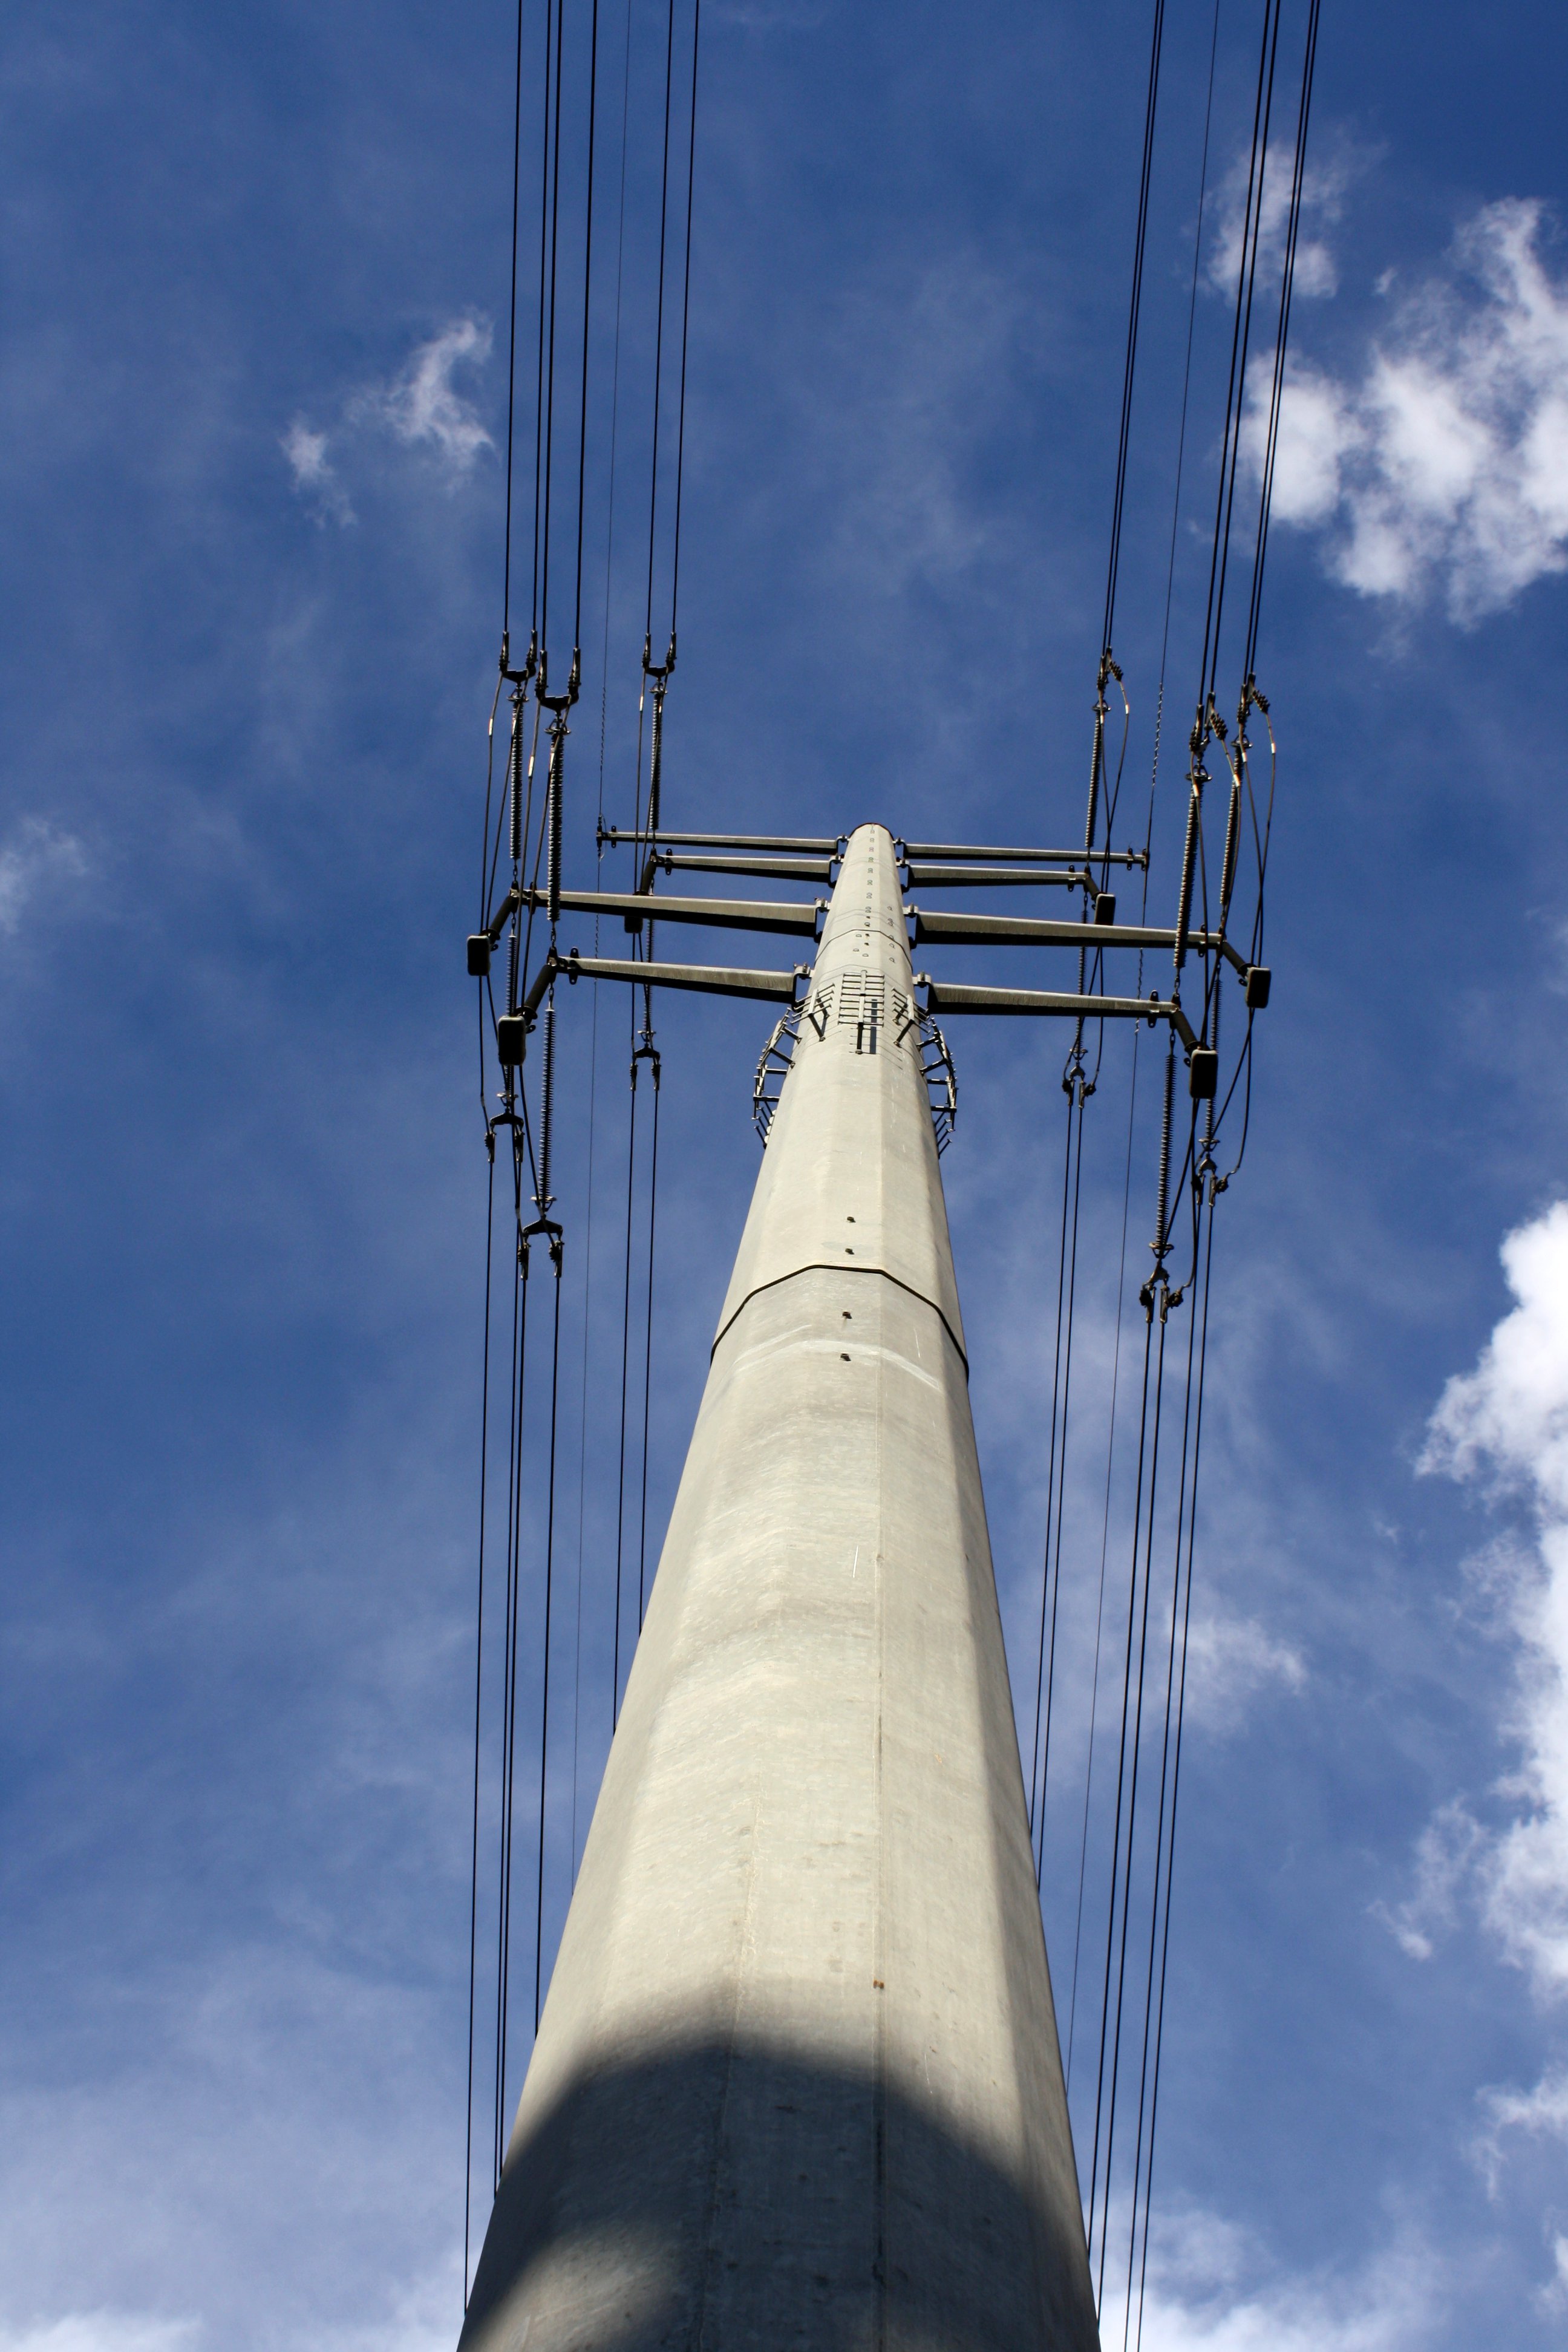 Electric Transmission Wires and Pole Picture | Free Photograph ...